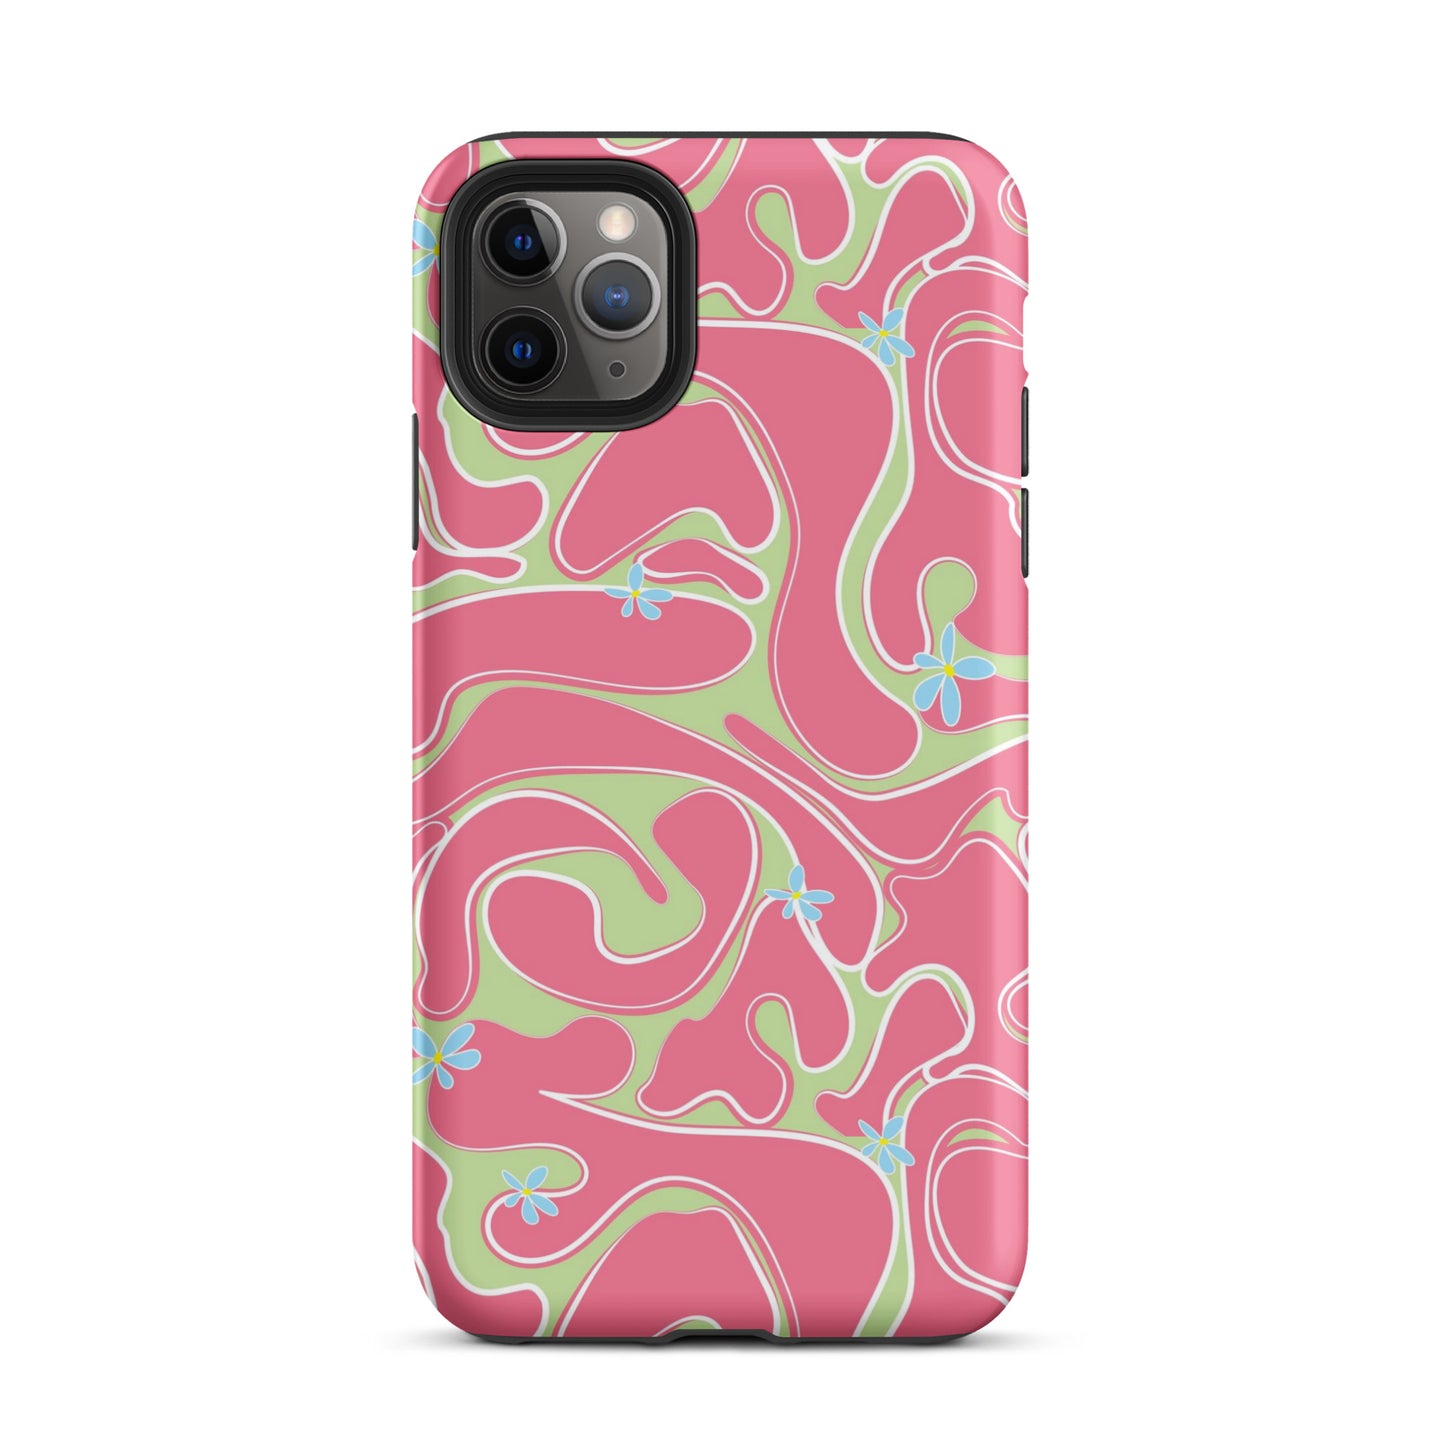 Reef Waves iPhone Case Matte iPhone 11 Pro Max